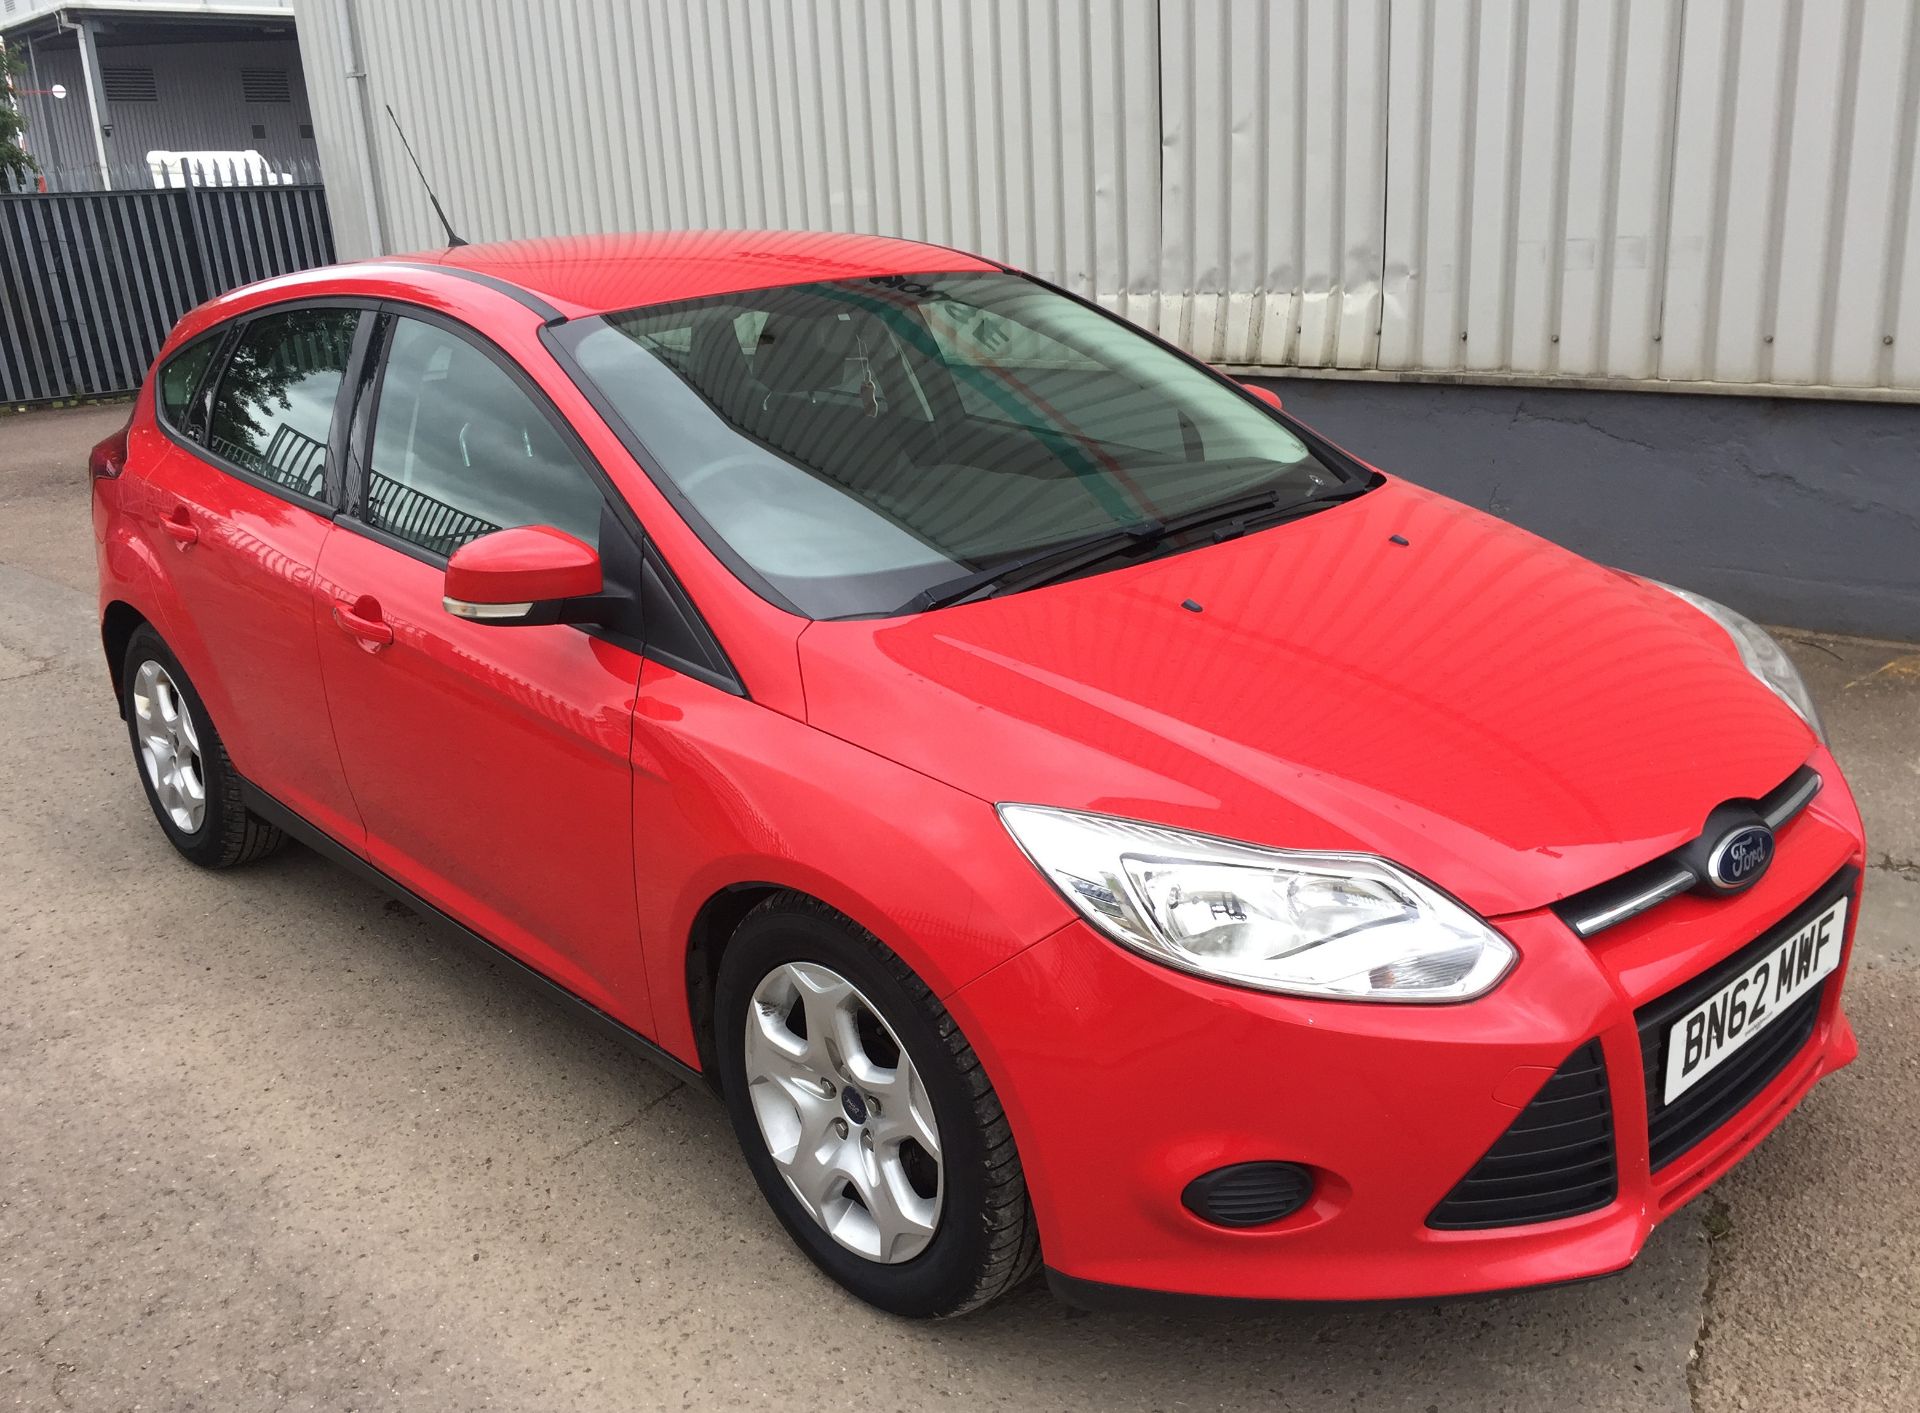 2012 Ford Focus 1.6 TDCi Edge 5 Door Hatchback - CL505 - NO VAT ON THE HAMMER - Location: Corby,